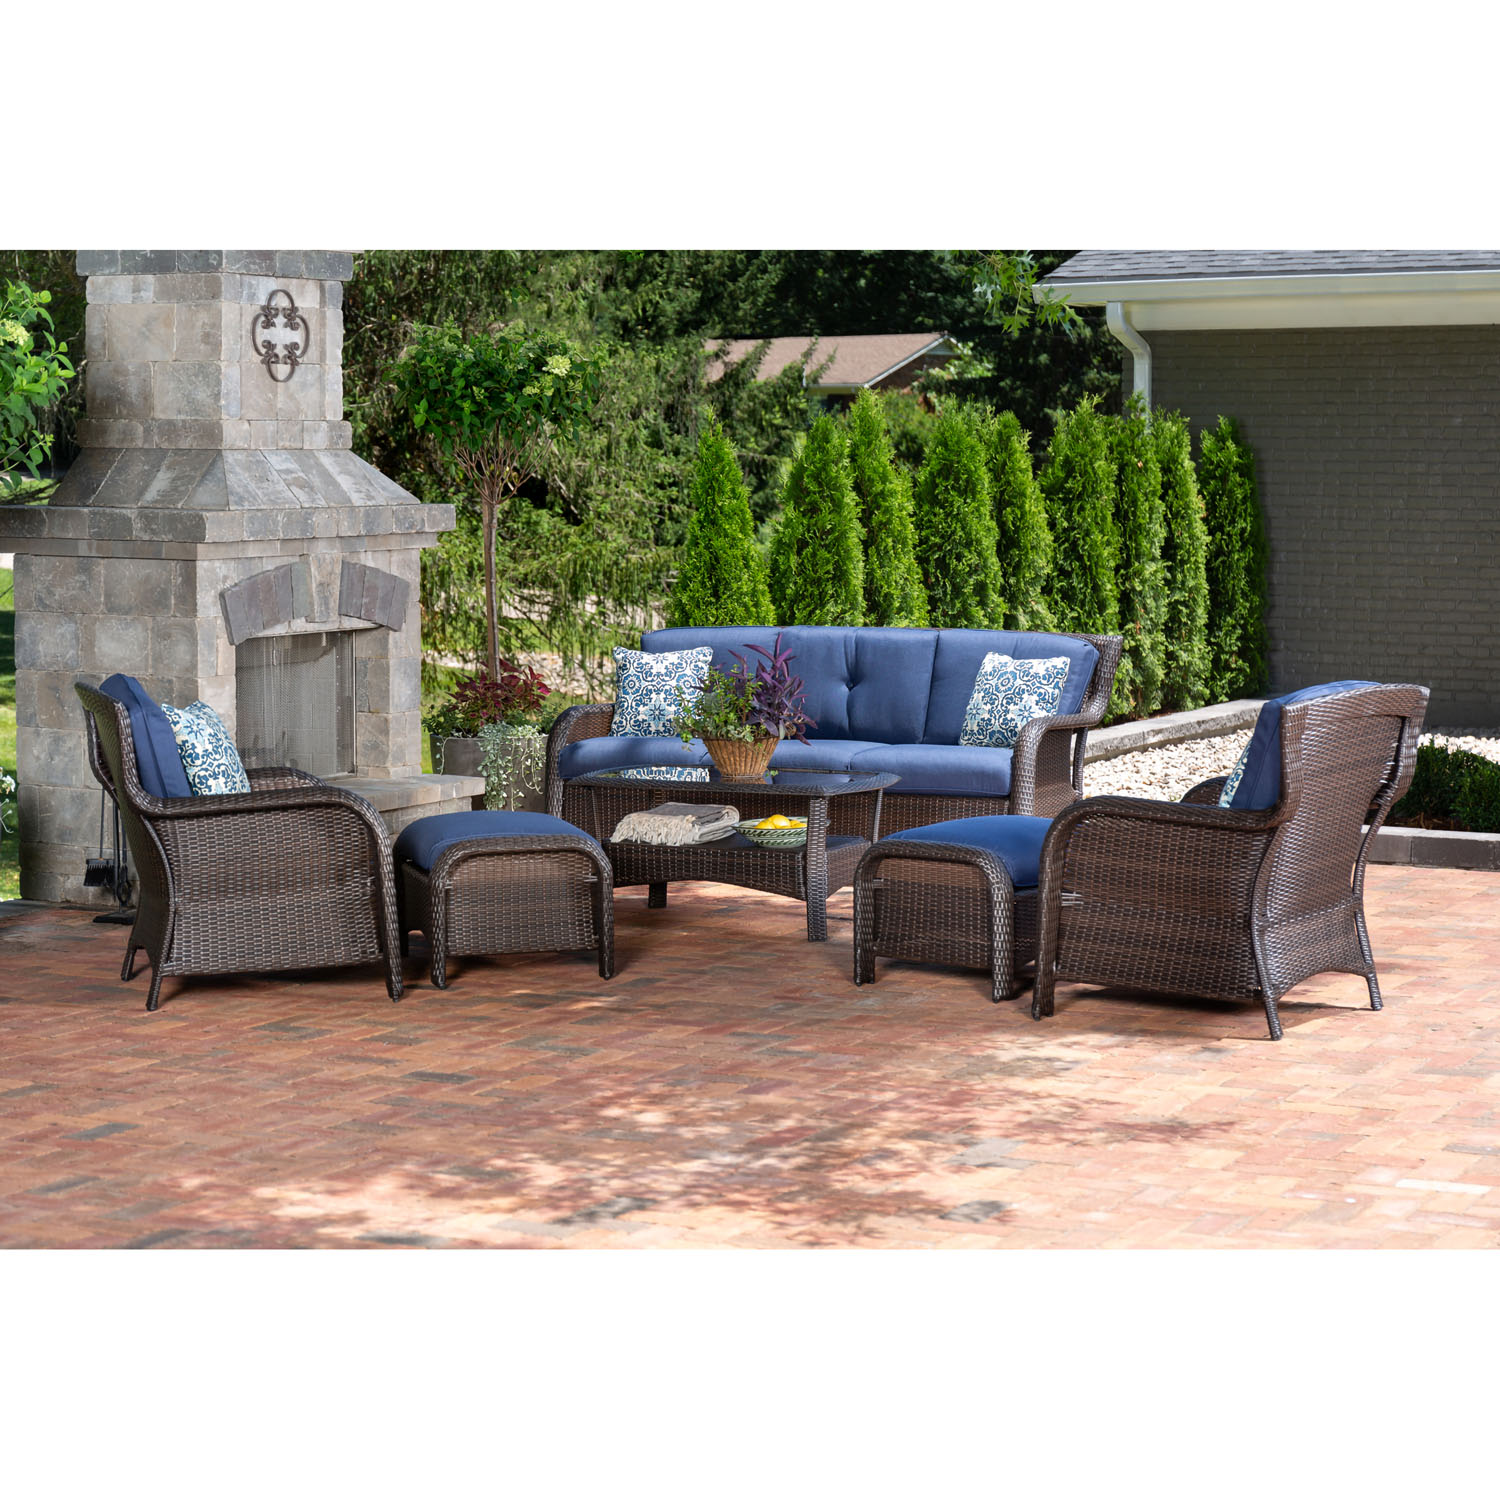 Hanover Strathmere 6-Piece Wicker and Steel Outdoor Conversation Set, Navy Blue - image 3 of 15